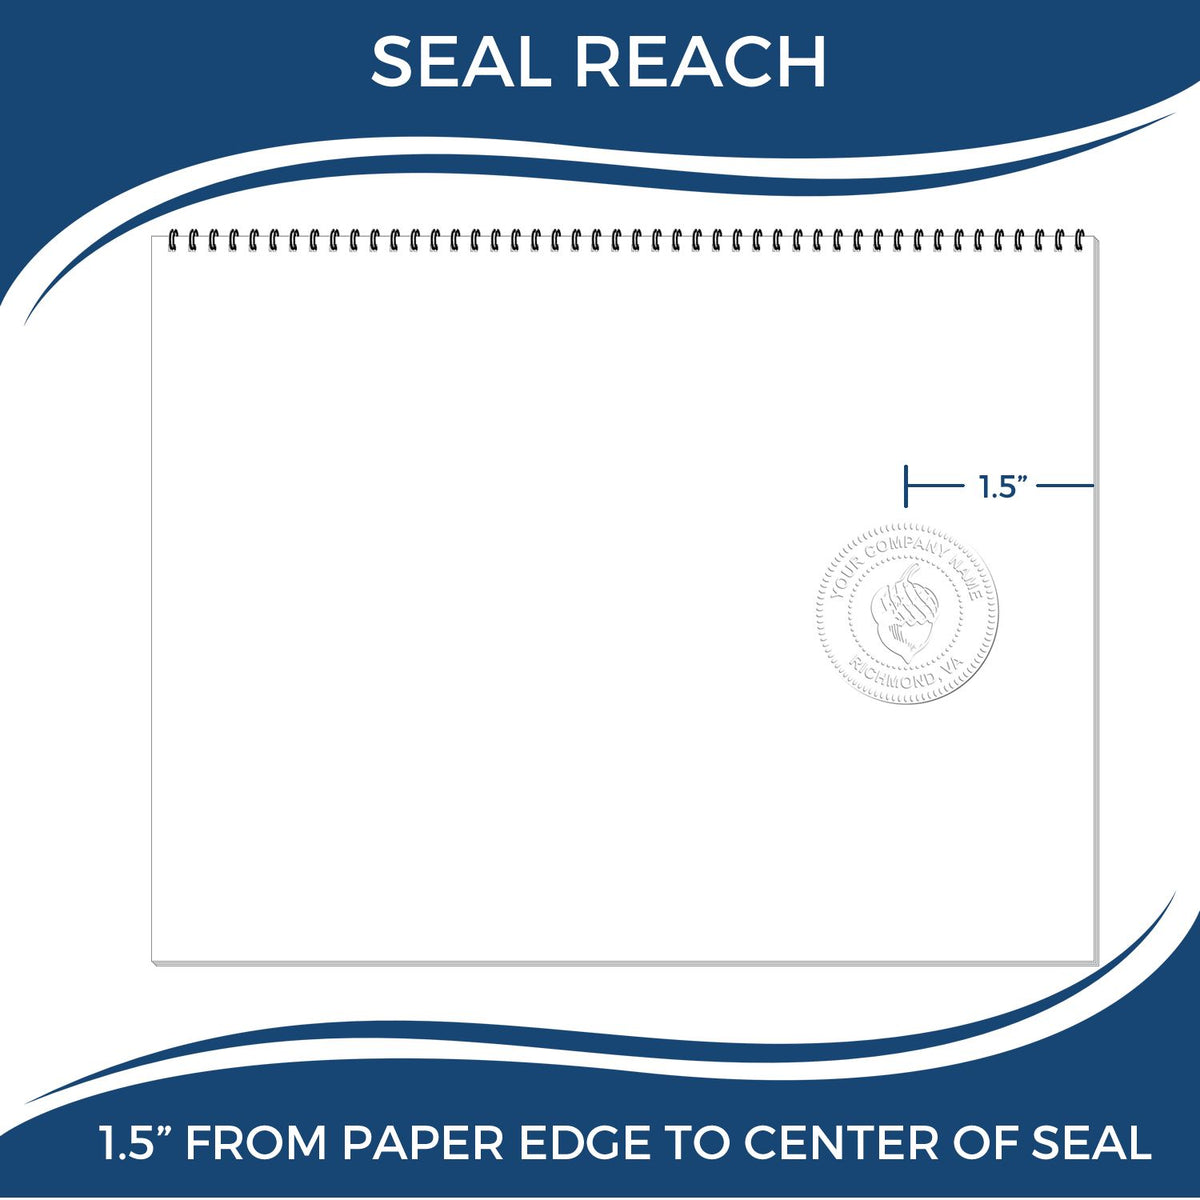 An infographic showing the seal reach which is represented by a ruler and a miniature seal image of the Hybrid Louisiana Landscape Architect Seal